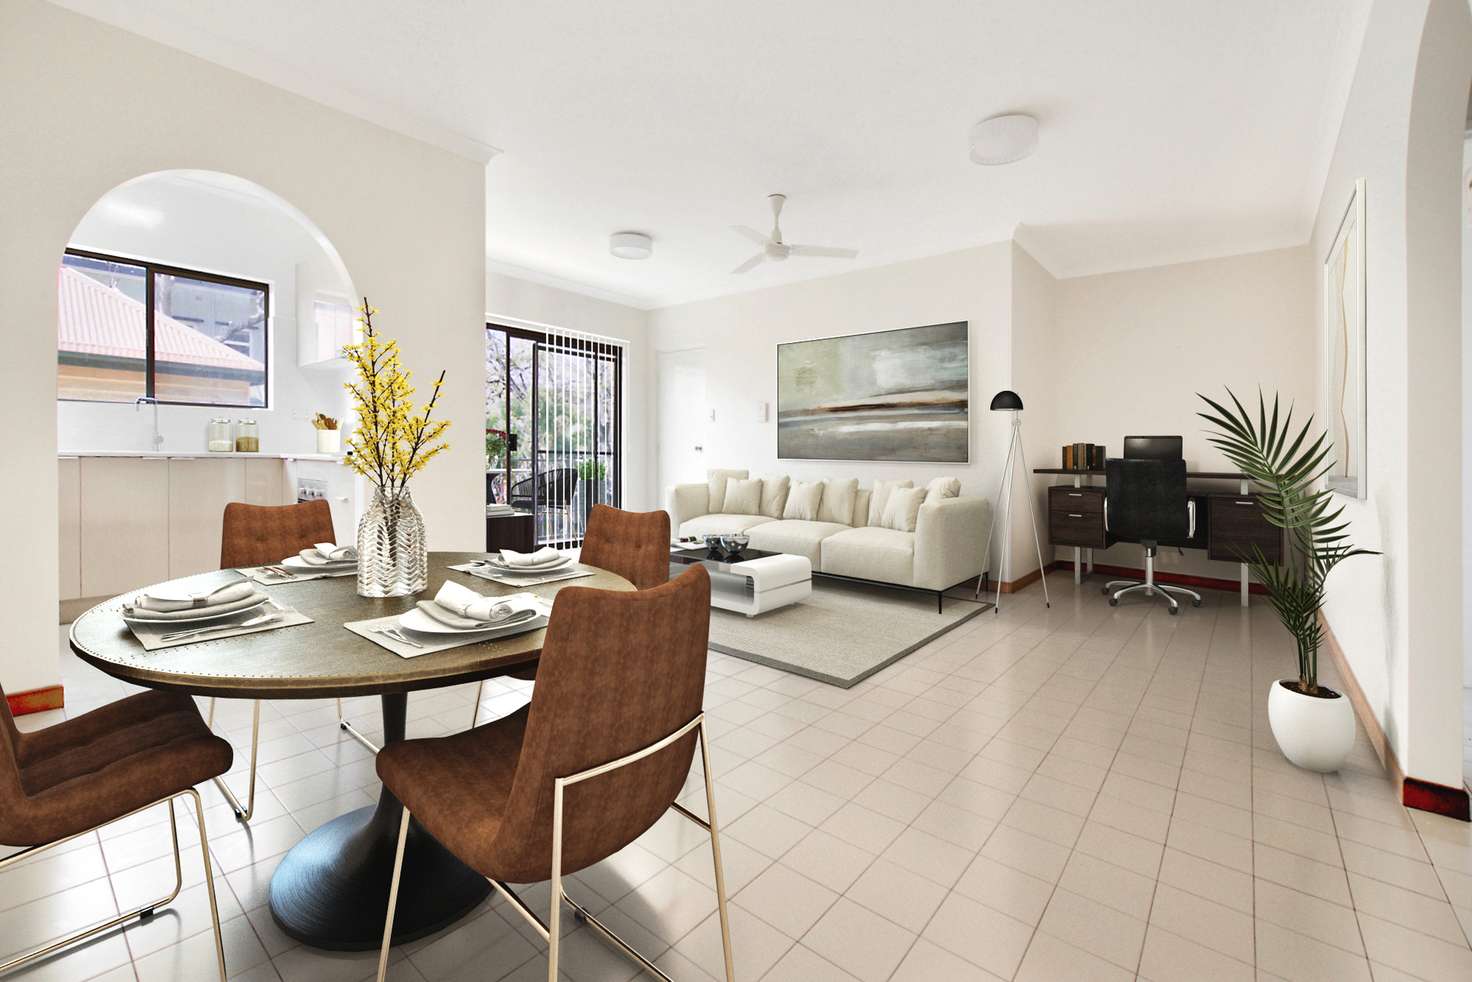 Main view of Homely apartment listing, 175 Harcourt Street, New Farm QLD 4005